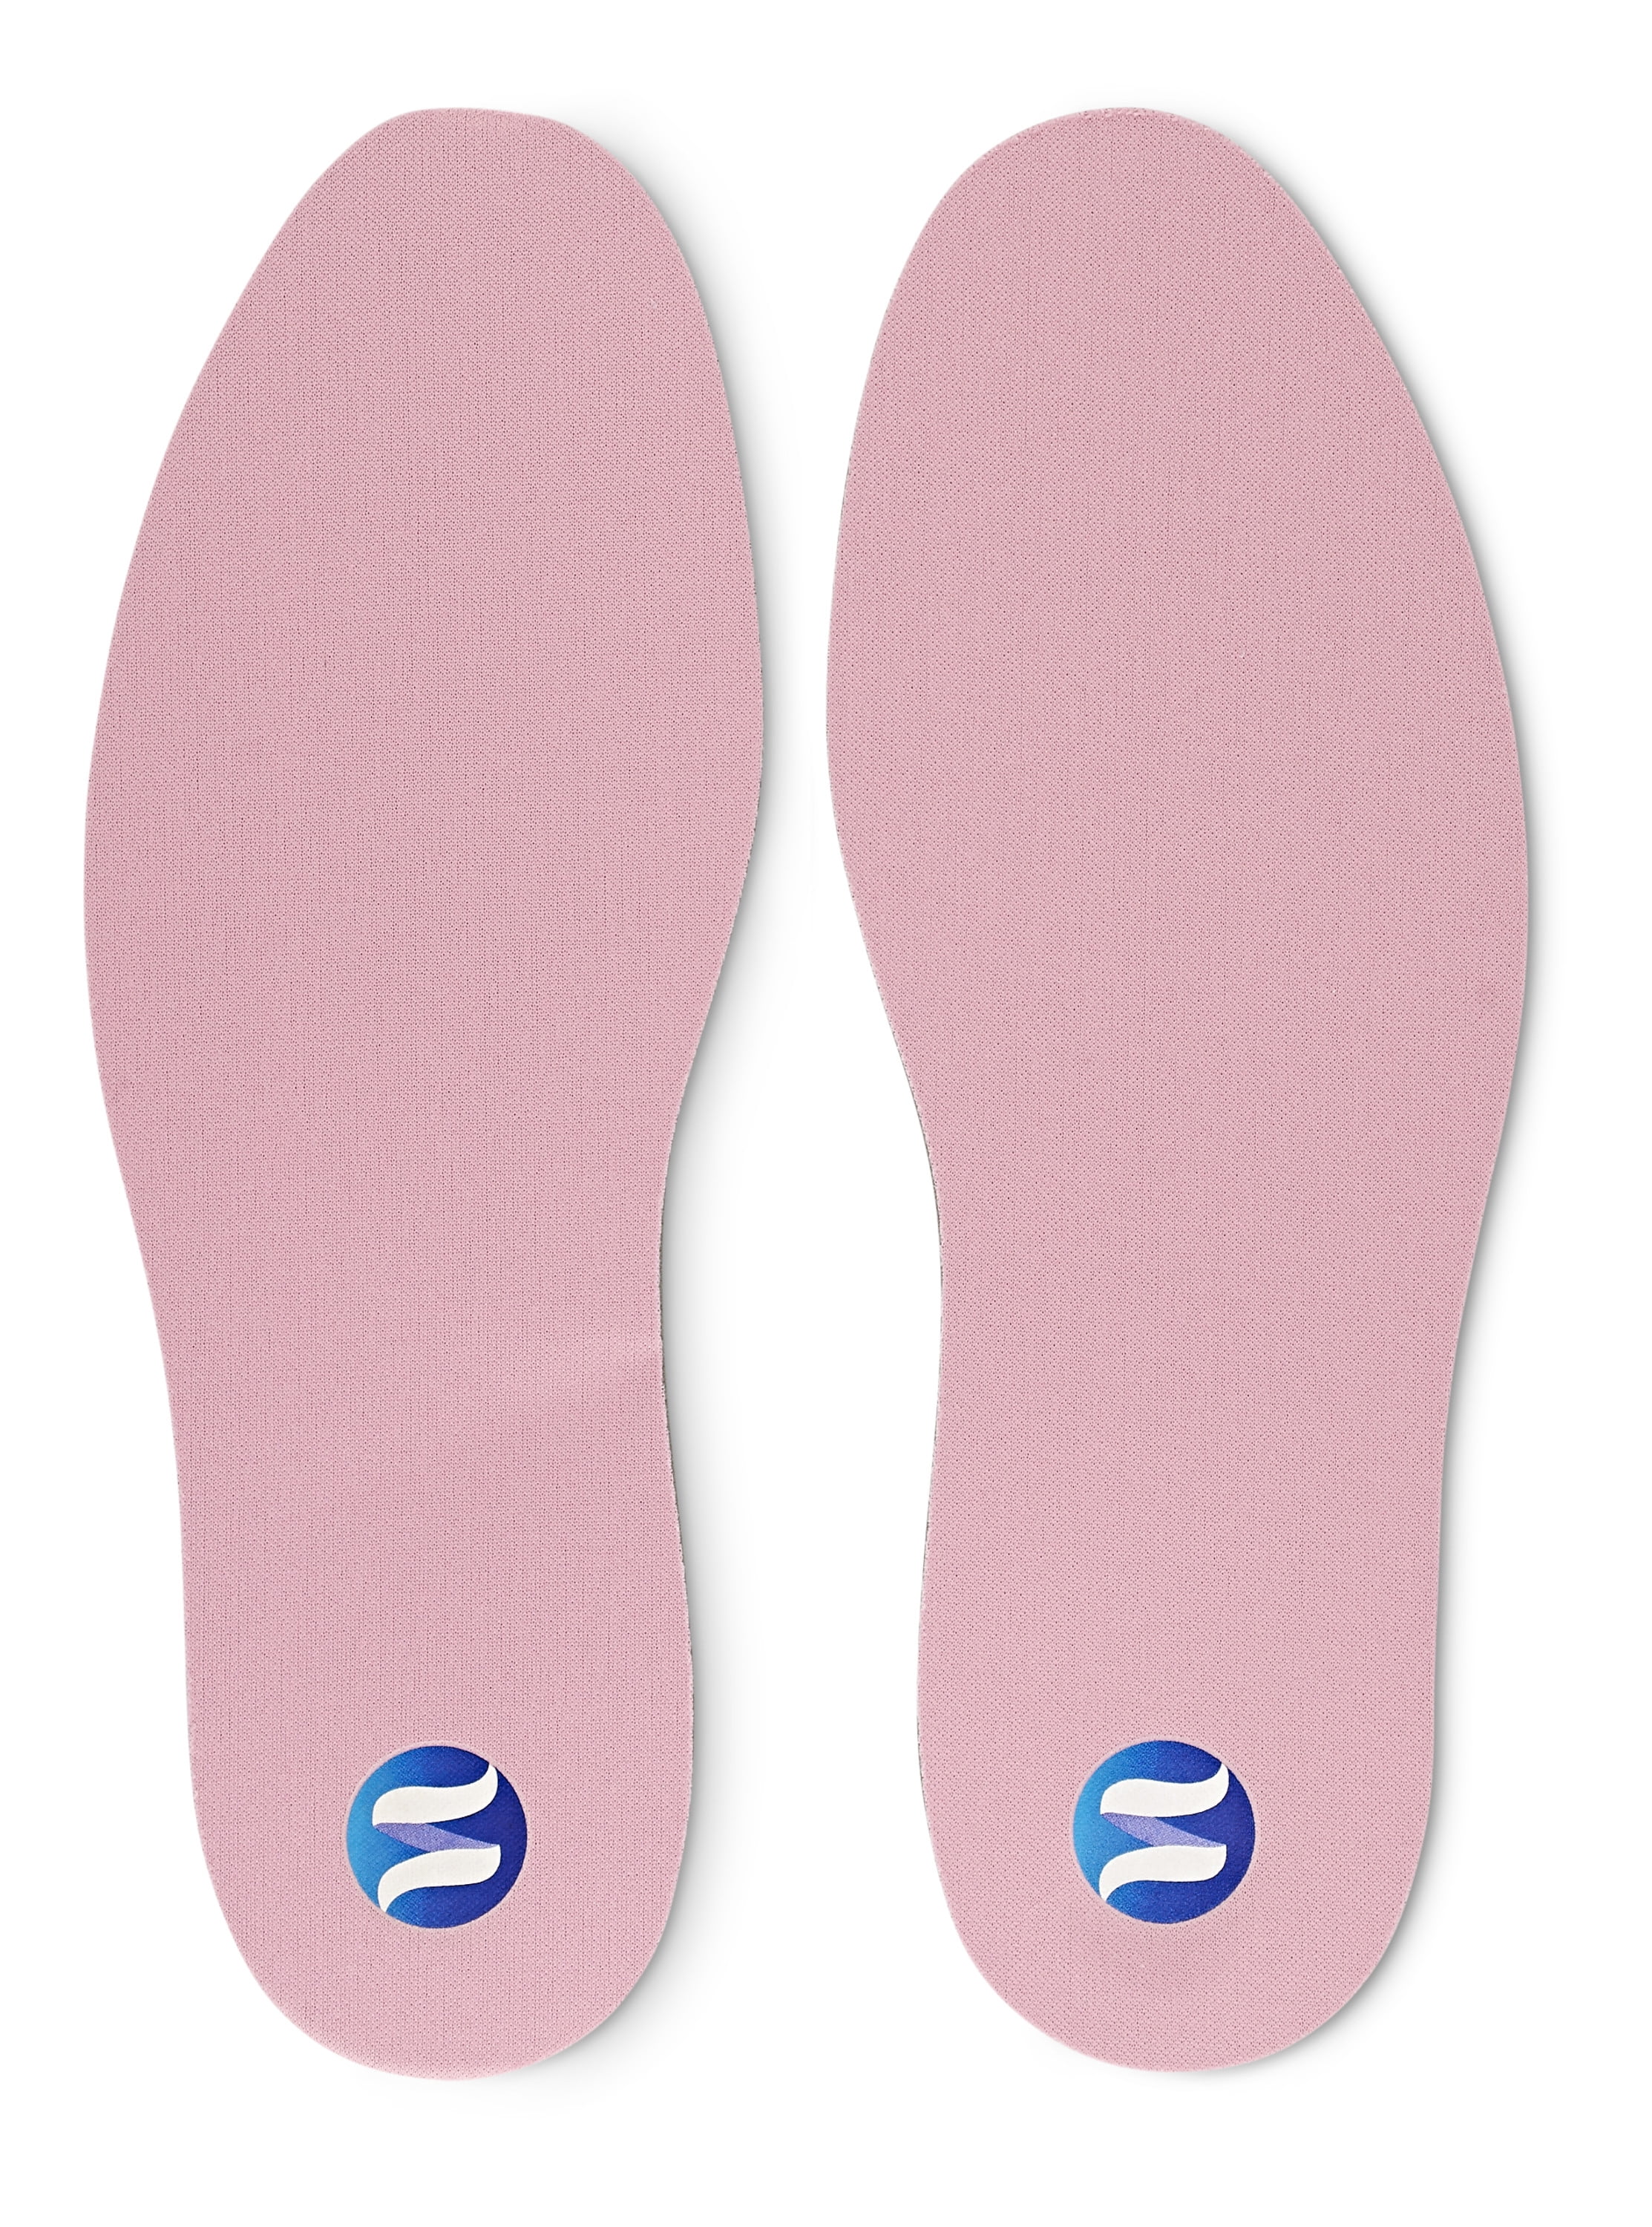 women's shoes with memory foam insoles